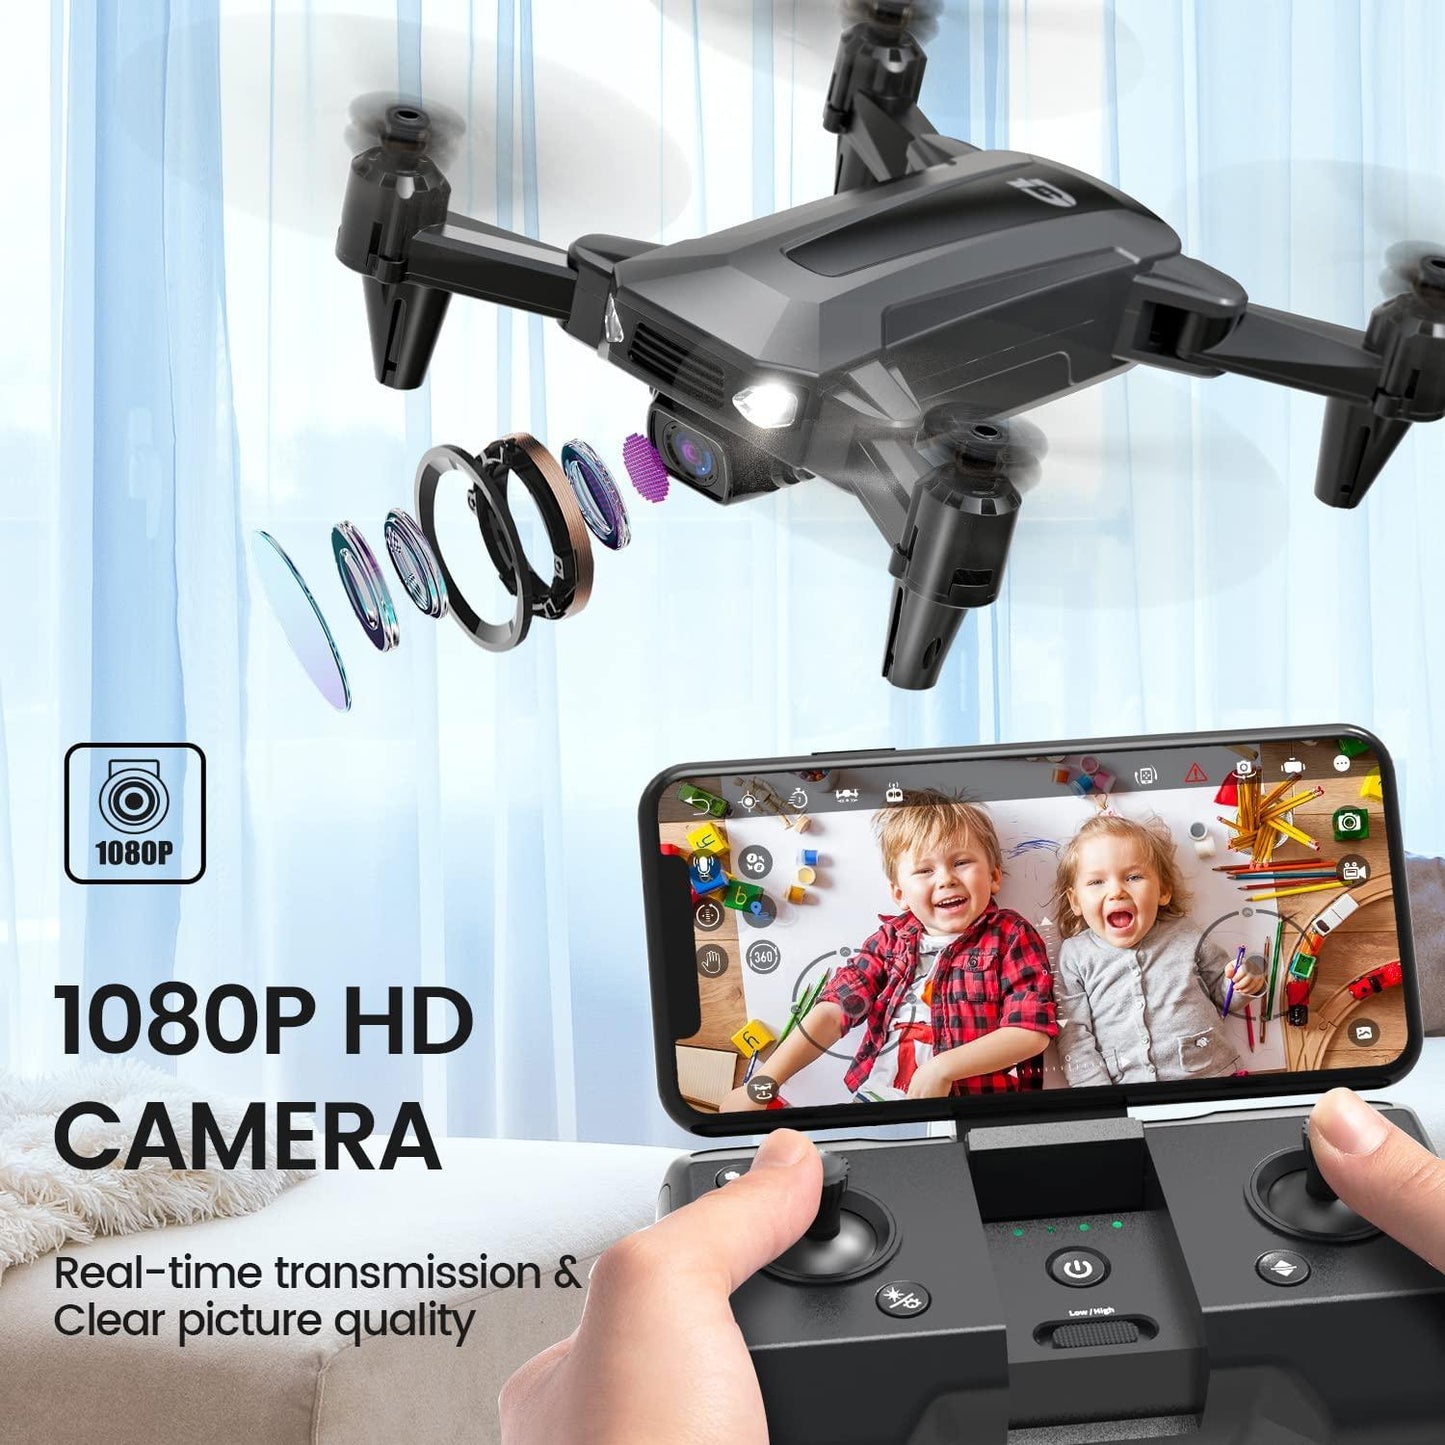 DEERC D40 Drone - FPV HD 1080P Mini Drones for Adults Kids Beginner, Foldable Quad Air Hobby RC Quadcopters & Multirotors, Toys Gifts, 2 Batteries 20 Mins Flight Time, Easy to Fly - RCDrone